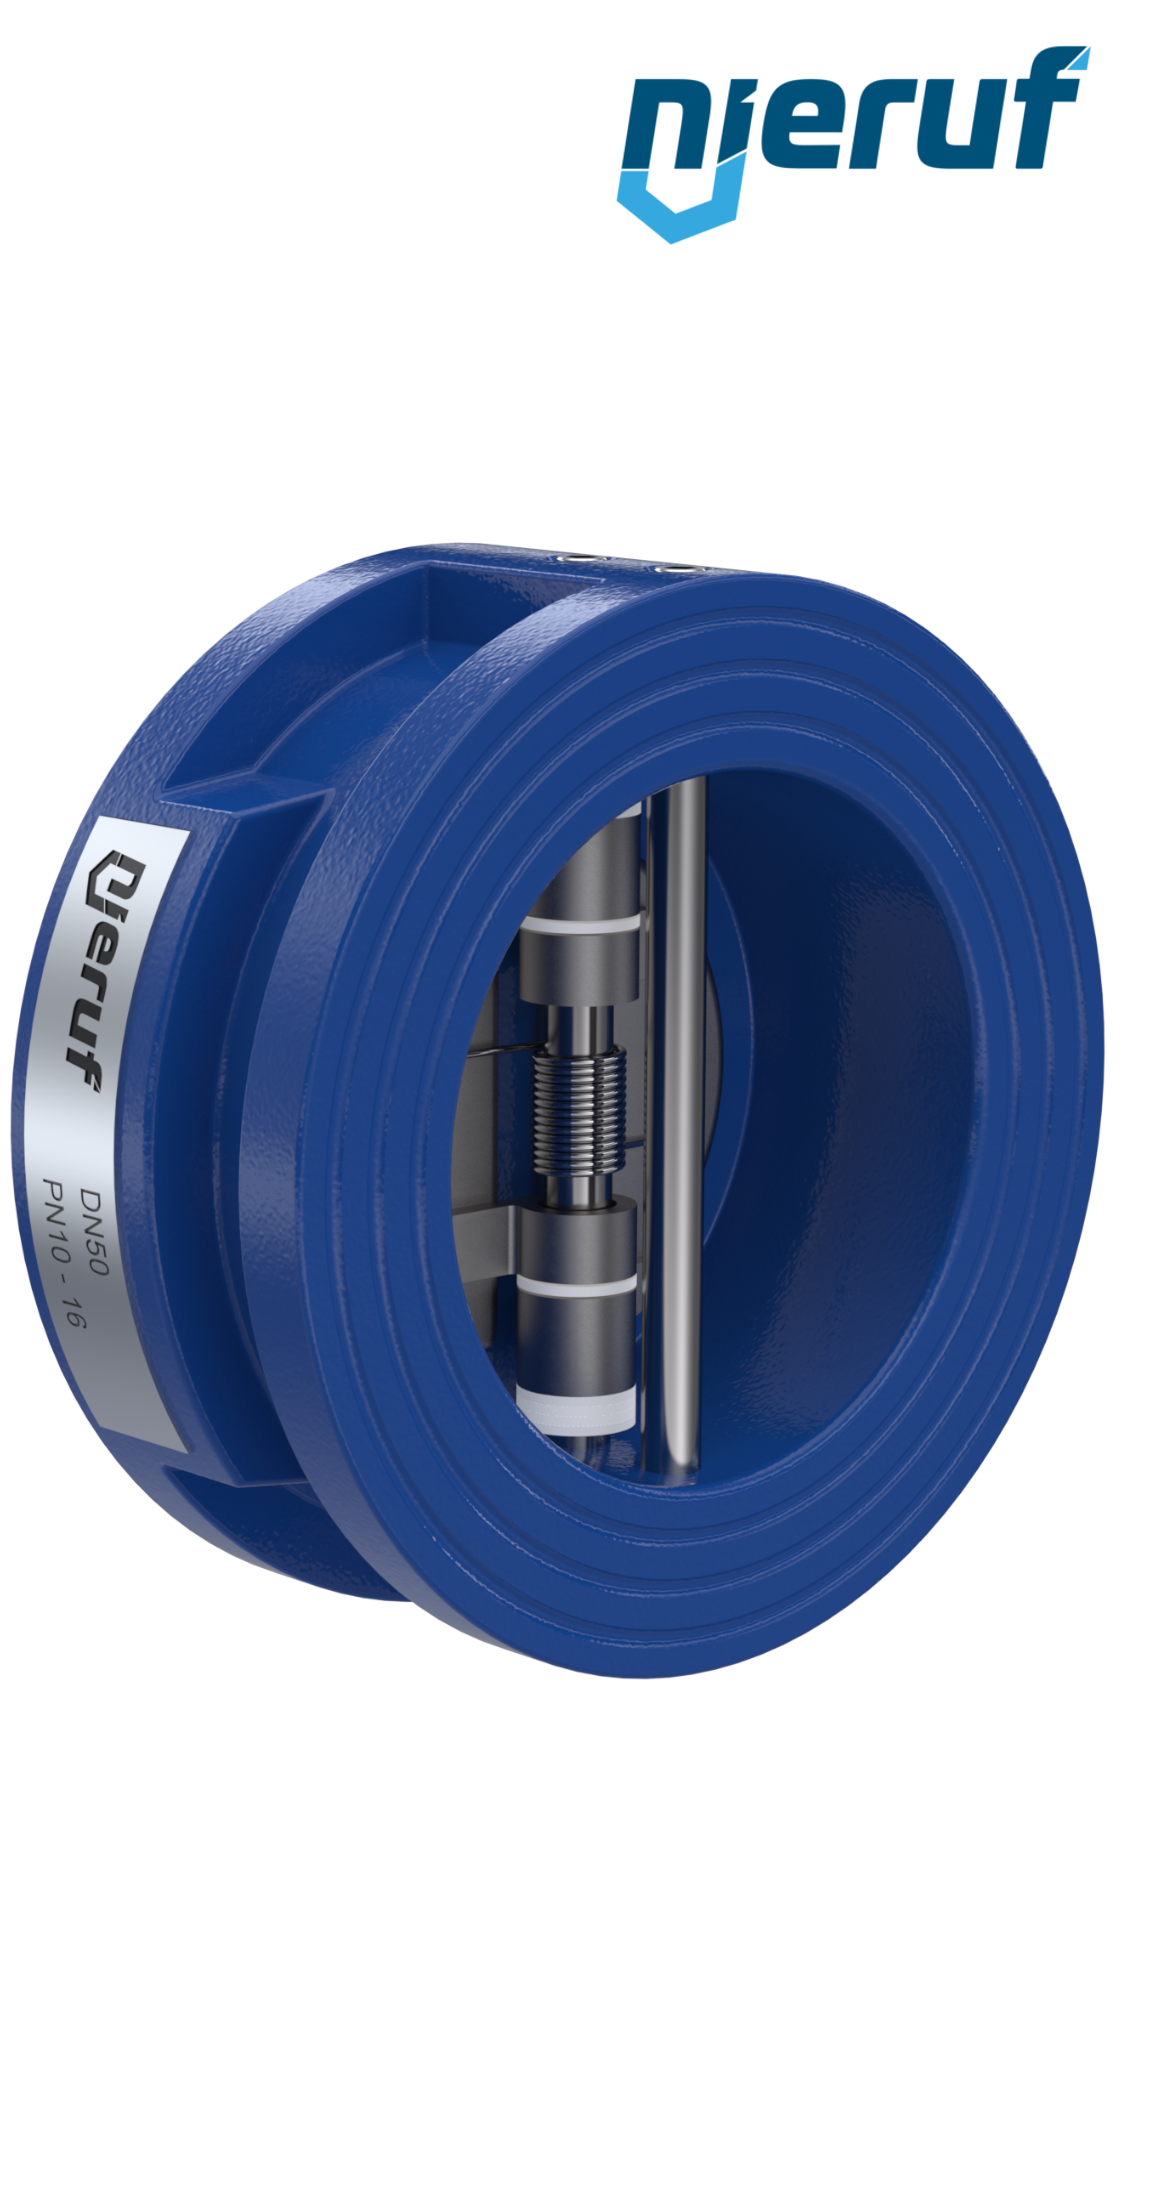 dual plate check valve DN50 DR02 GGG40 epoxyd plated blue 180µm EPDM